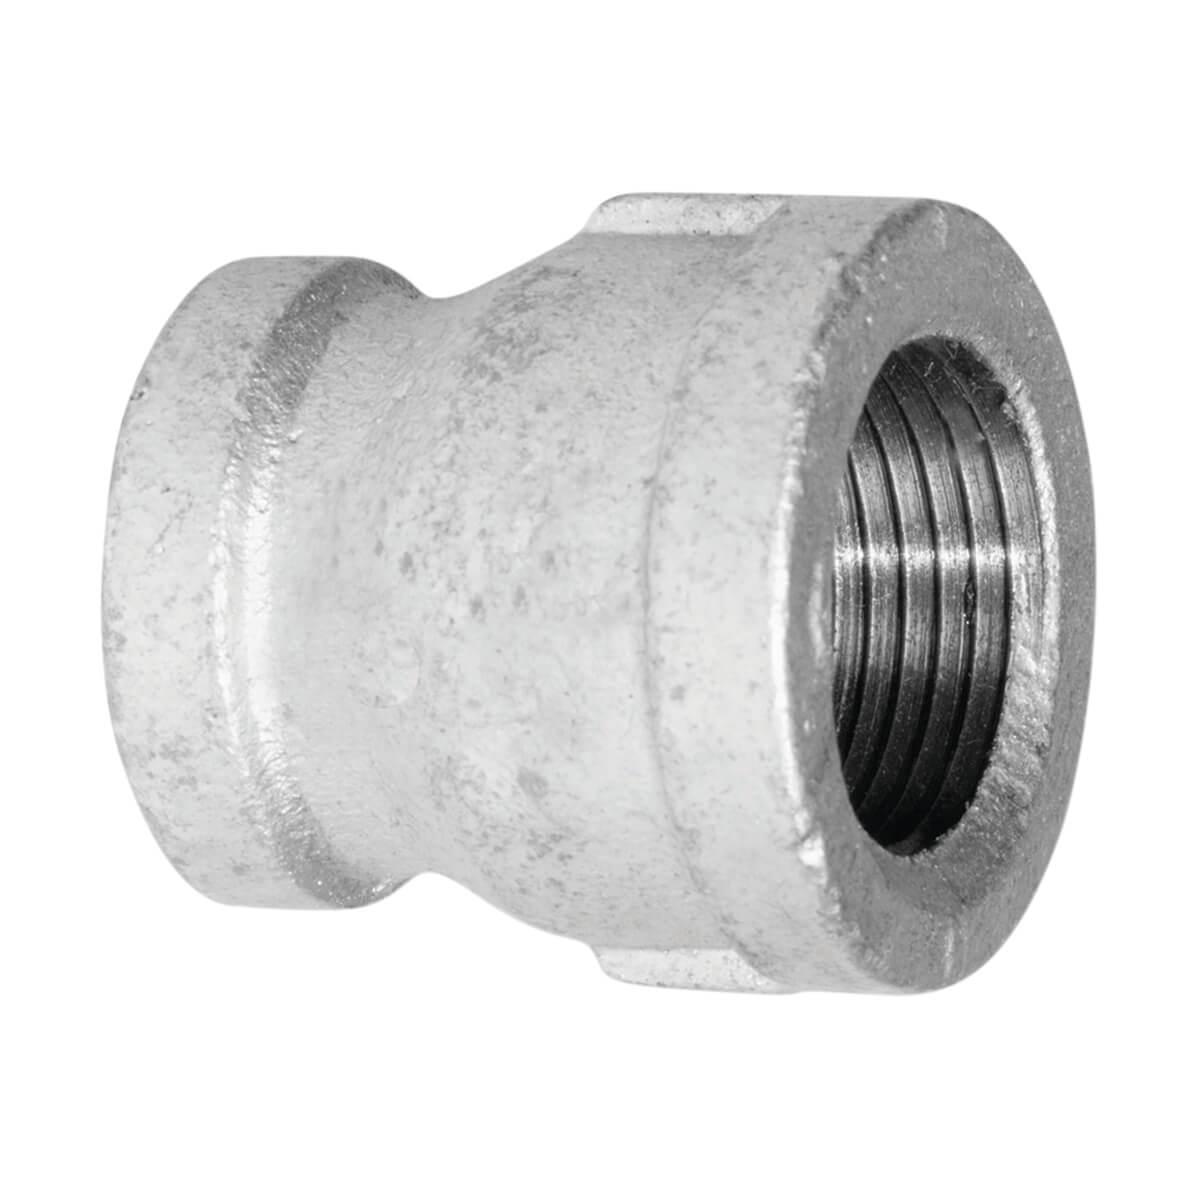 Fitting Galvanized Iron Coupling - 2-in x 1/2-in